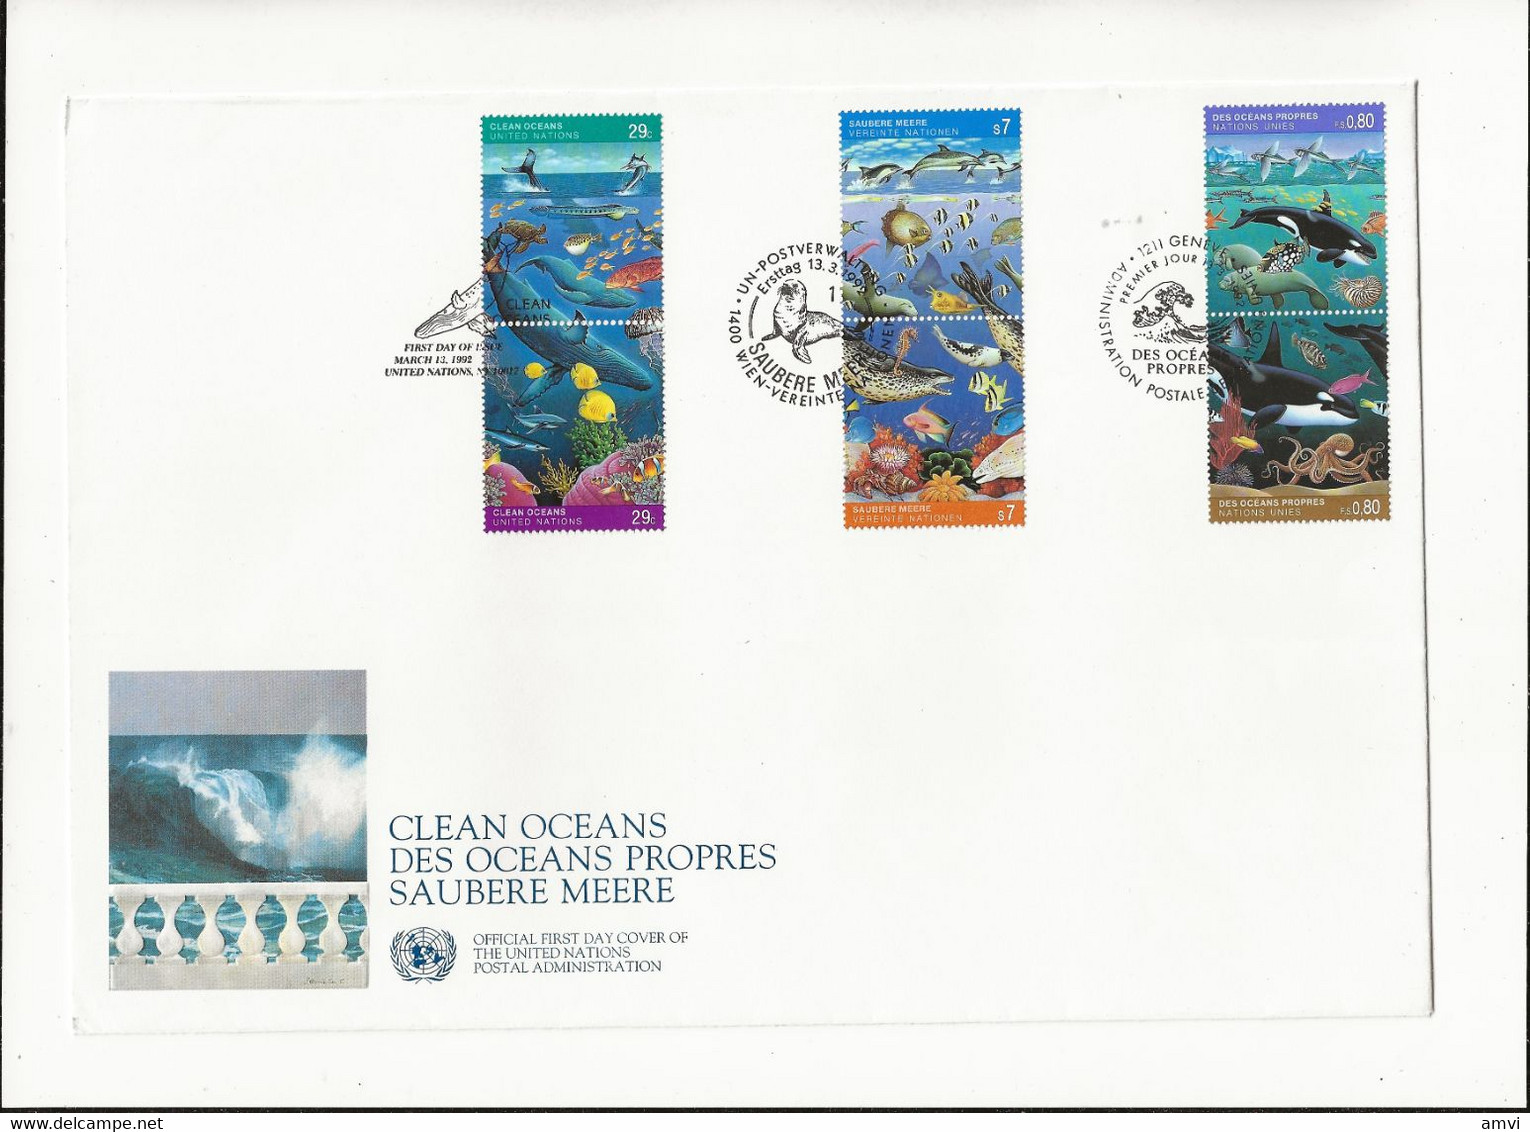 22-4 - 878 WHALES DOLPHIN FISH Multi Stamps FDC UN Vienna United Nations Environment Clean Oceans - Balene